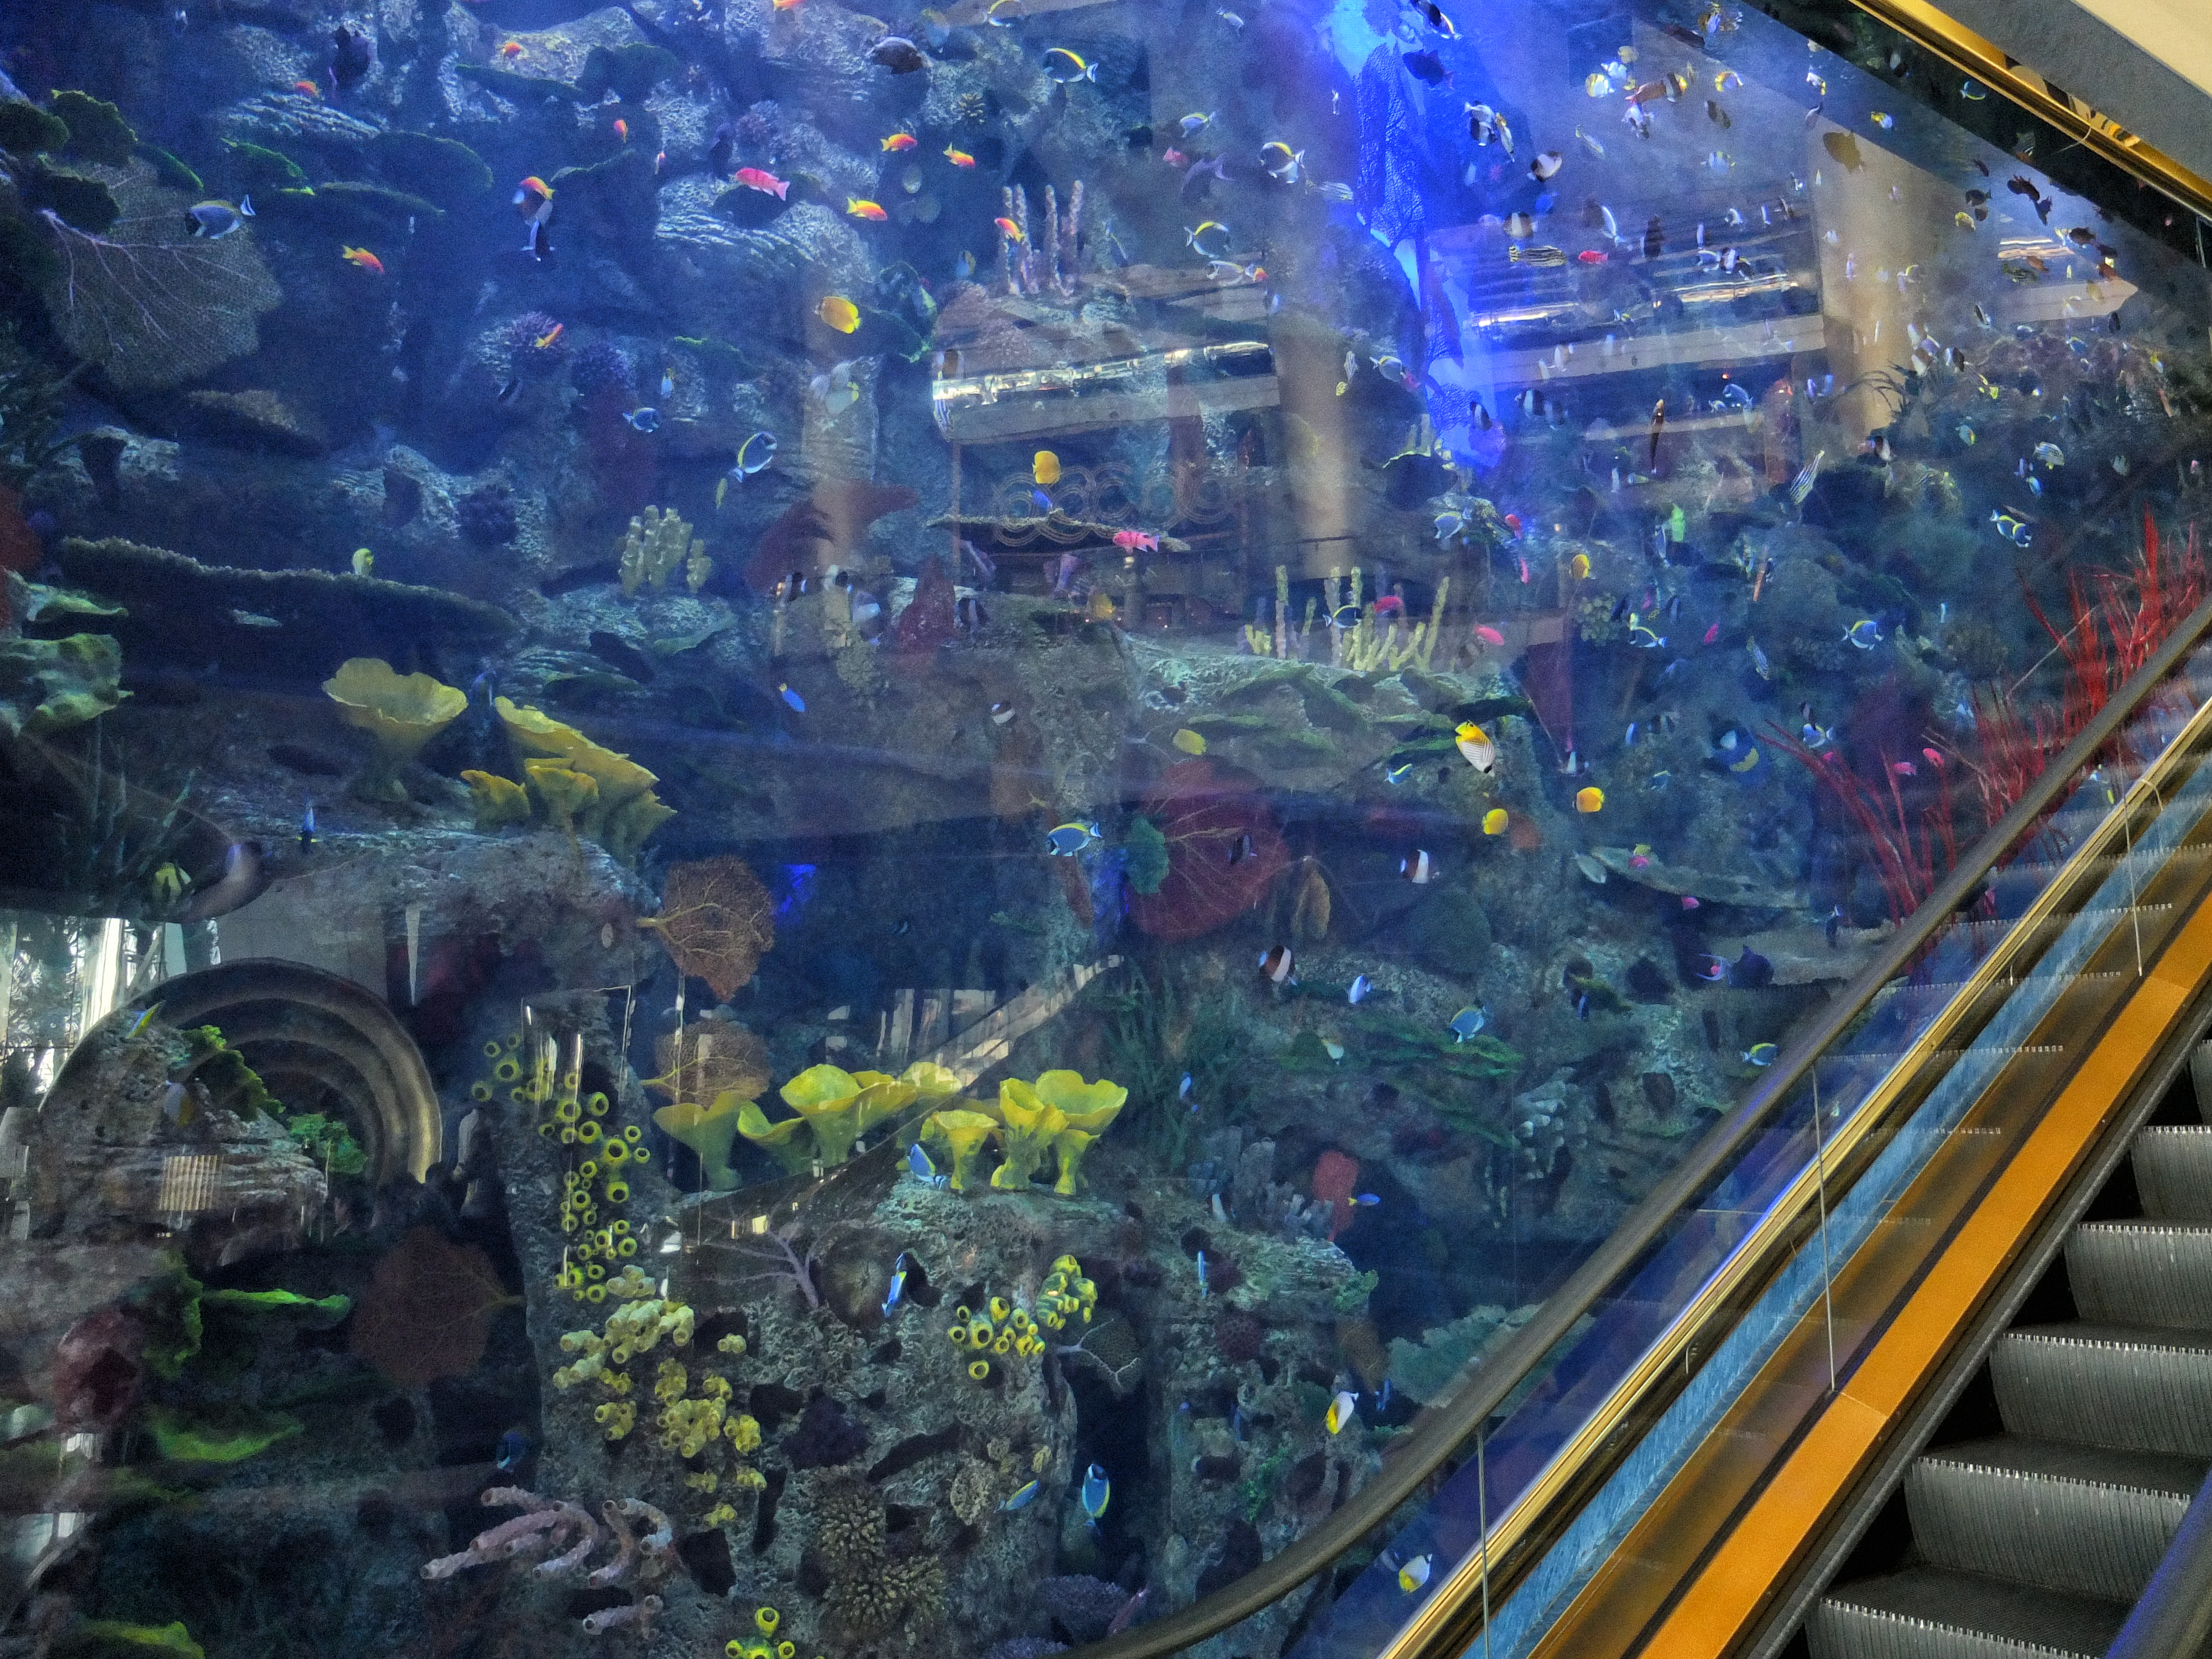 Of COURSE they had an aquarium